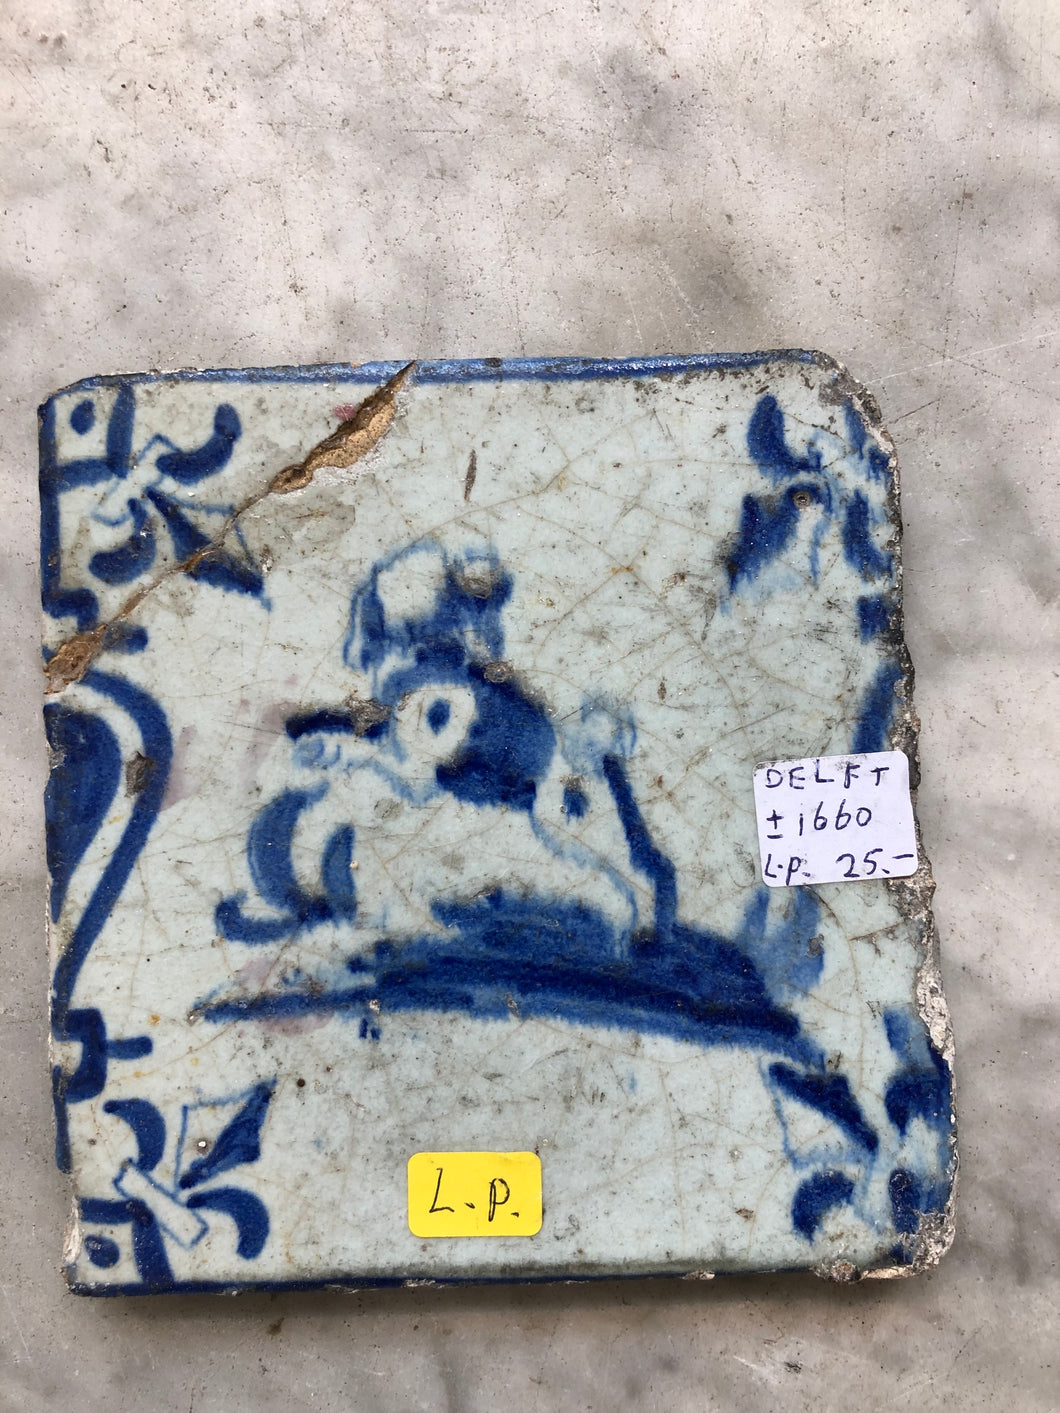 17 th century delft tile with dog